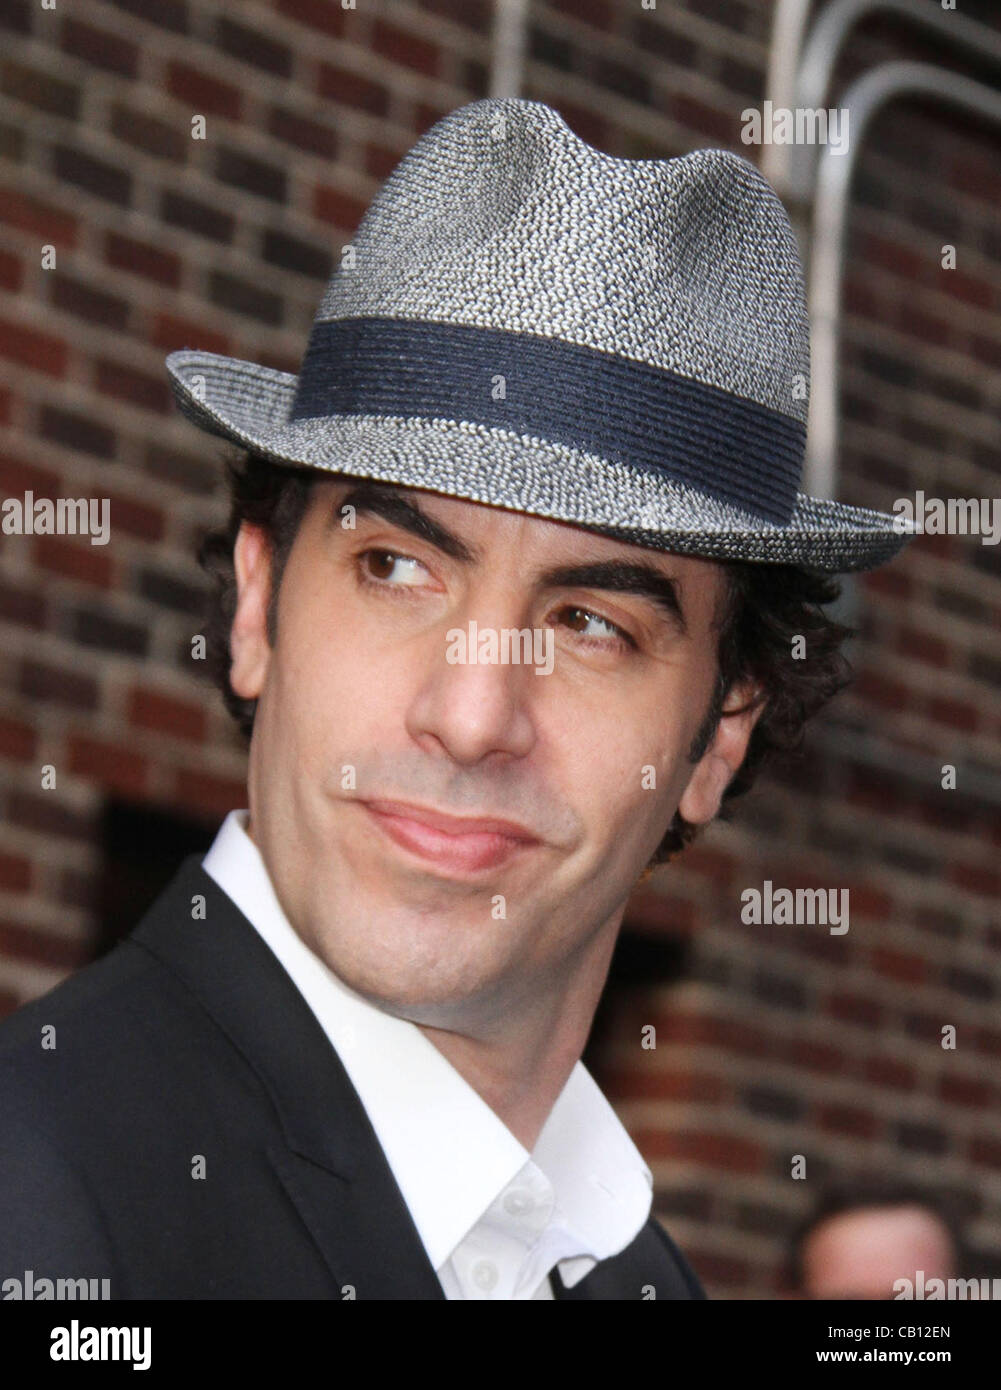 May 17, 2012 - New York, New York, U.S. - Actor/comedian SACHA BARON COHEN at his appearance on 'The Late Show With David Letterman' held at the Ed Sullivan Theater. (Credit Image: © Nancy Kaszerman/ZUMAPRESS.com) Stock Photo